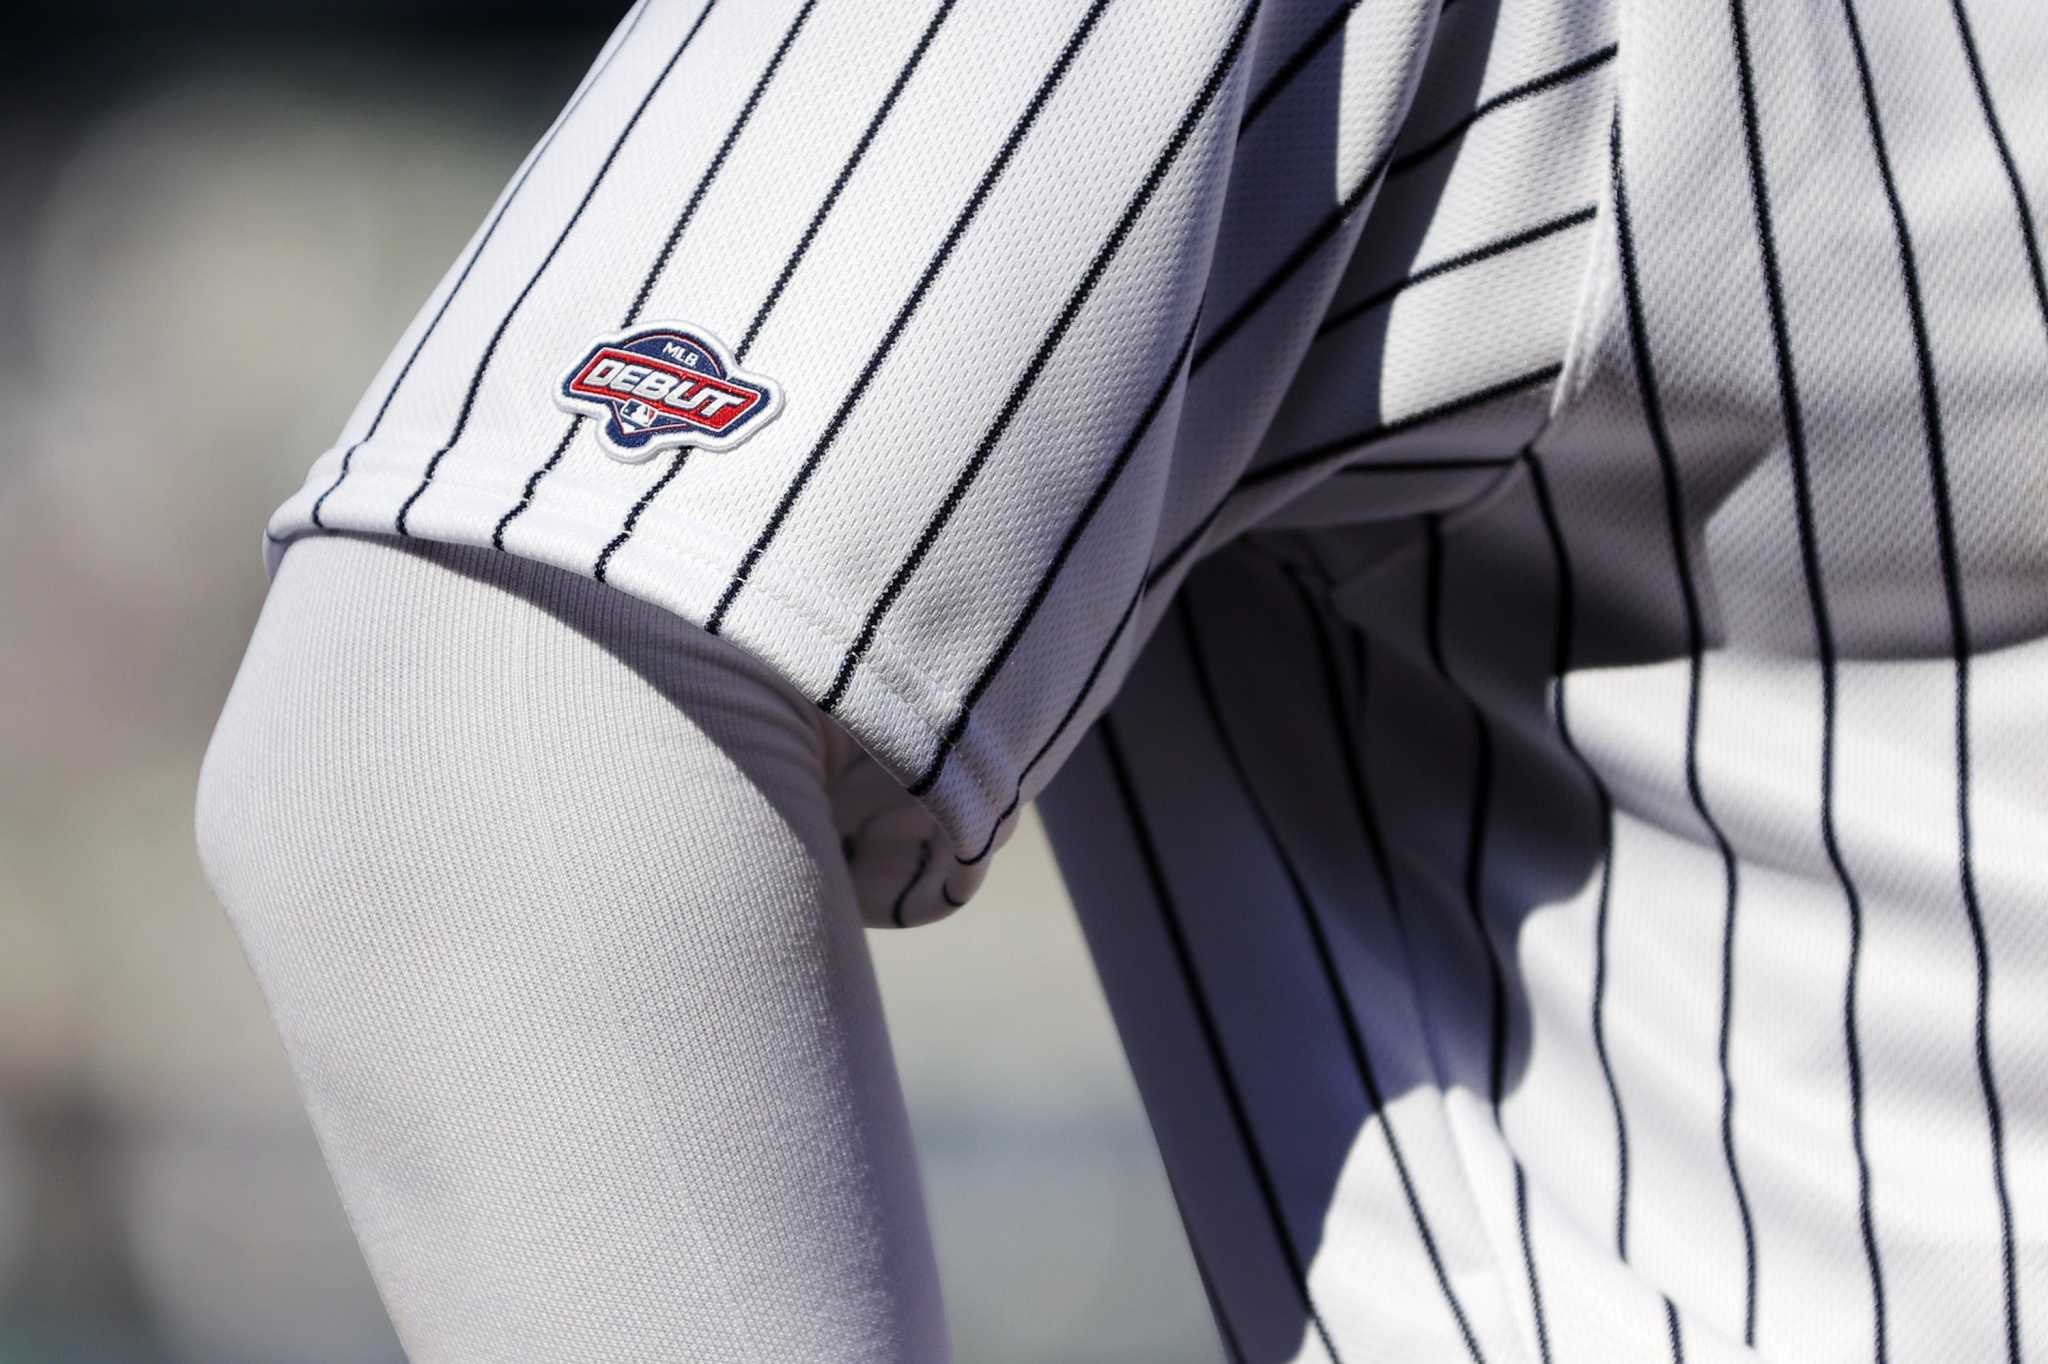 MLB's debut players wearing special patches on jerseys